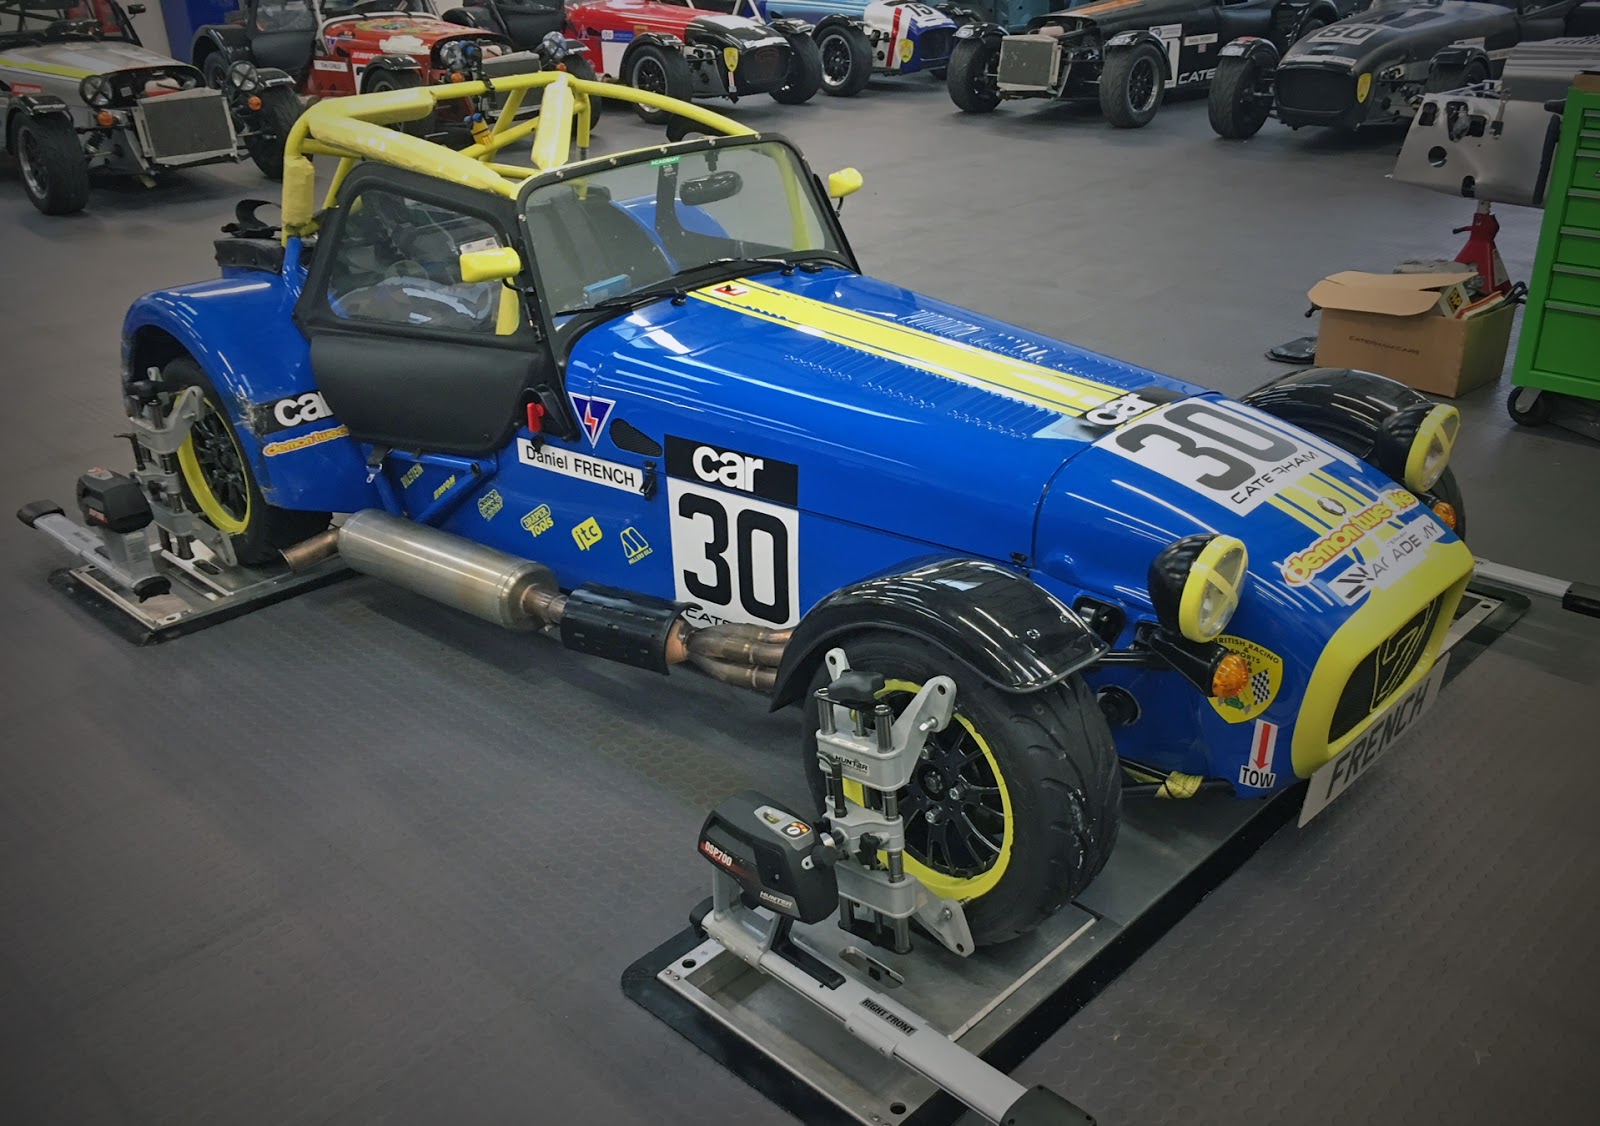 RP-X™-Equipped Caterham Racer Secures Two Podiums at Spa